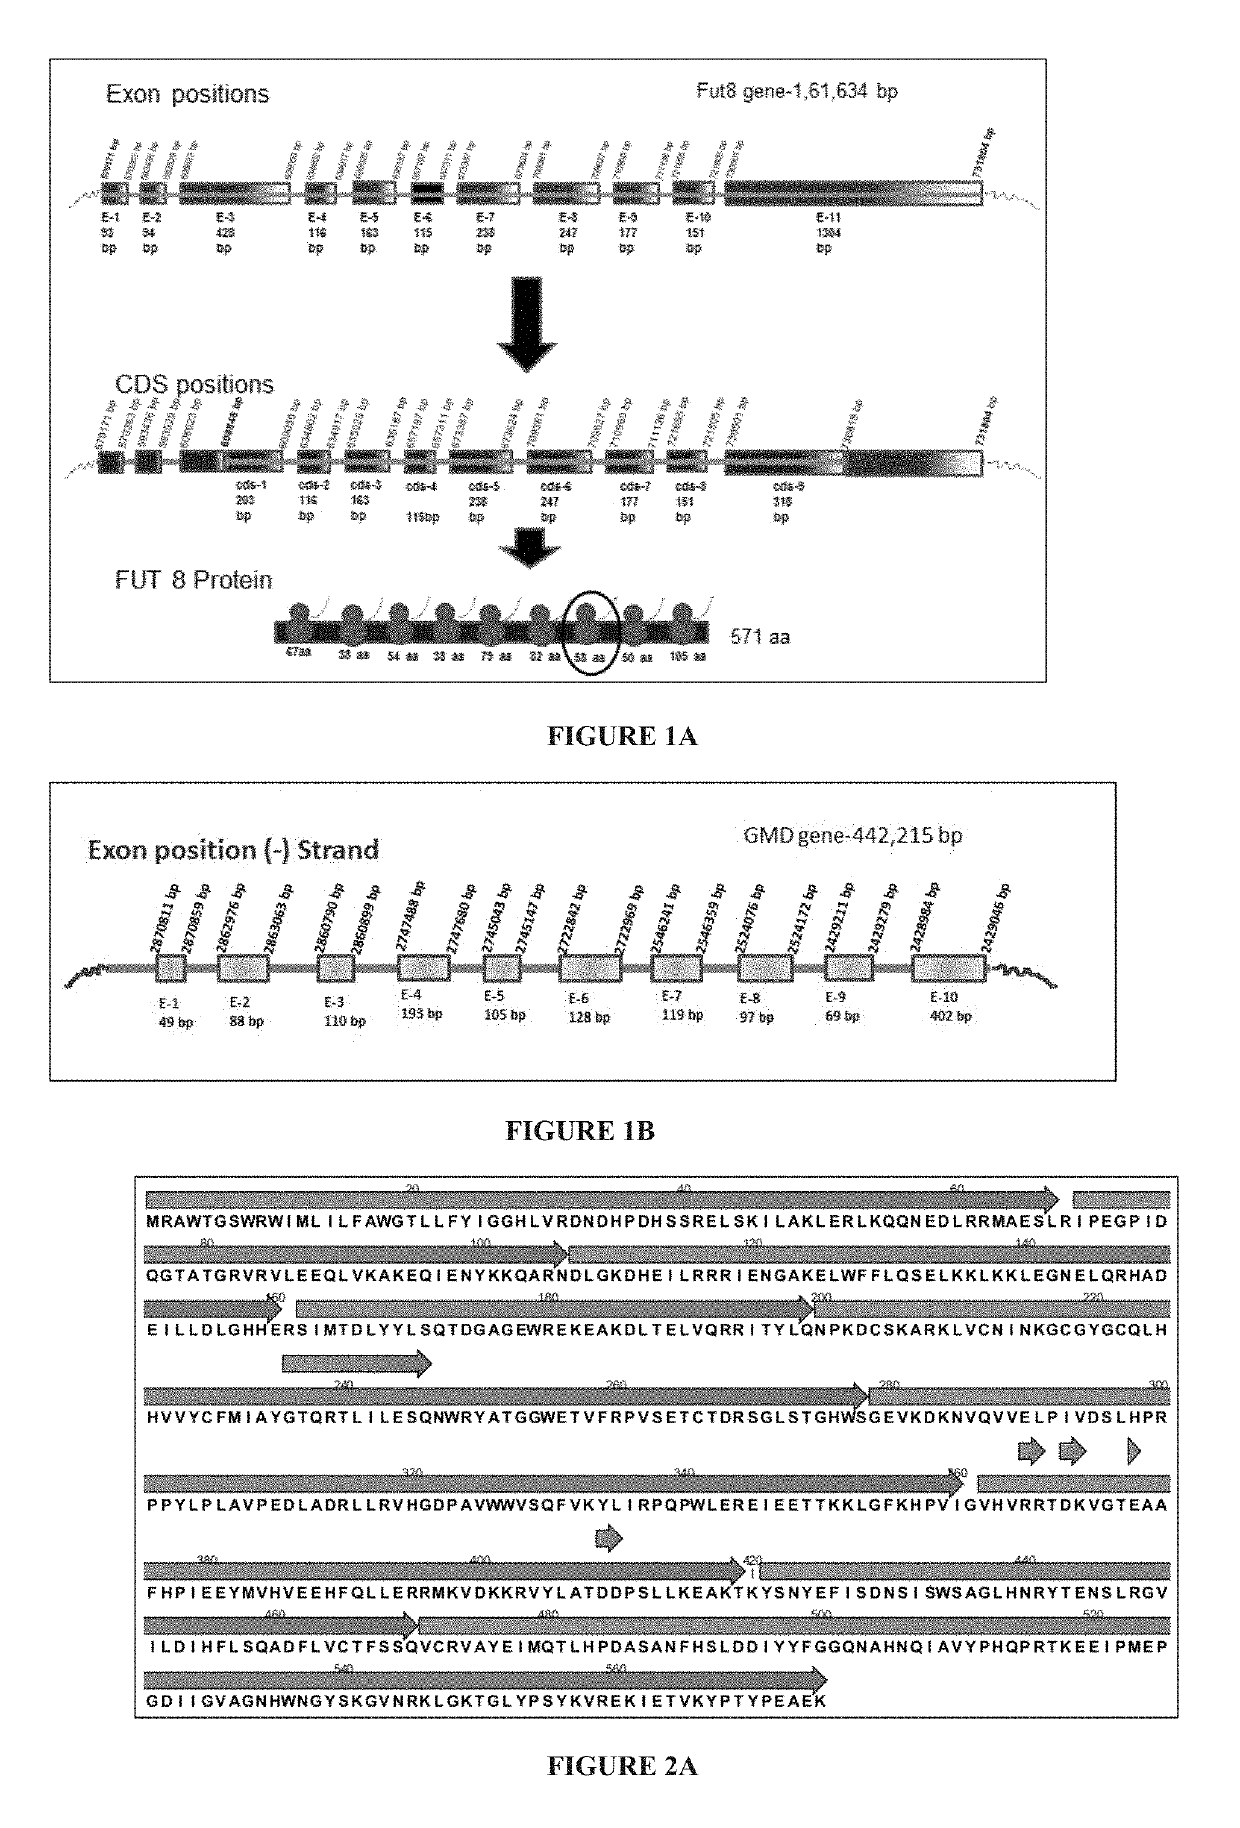 Dna-binding domain of crispr system, non-fucosylated and partially fucosylated proteins, and methods thereof